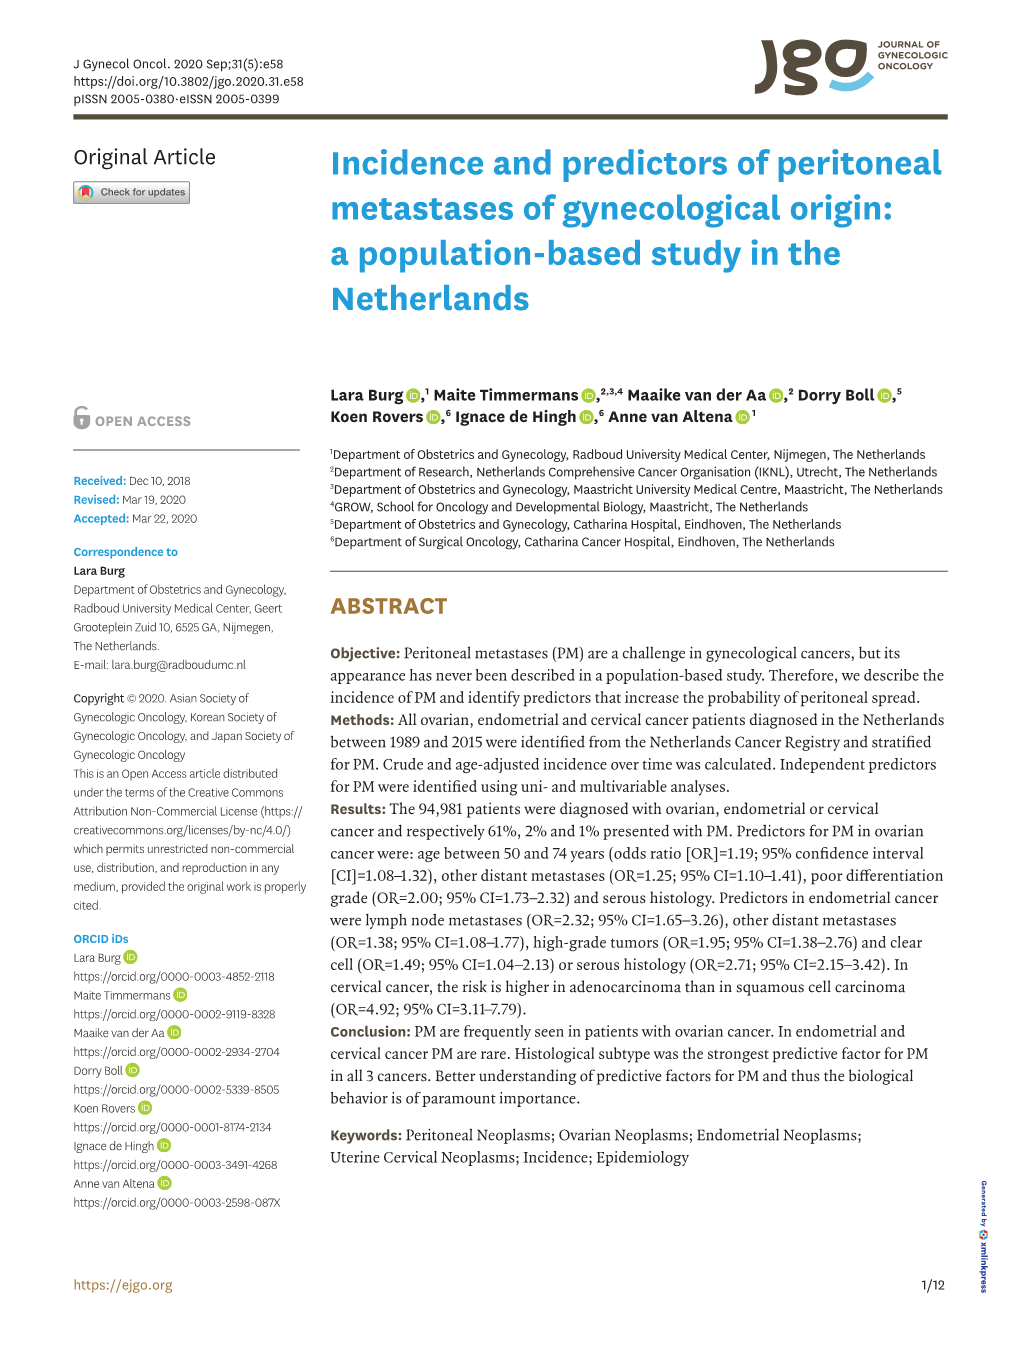 Incidence and Predictors of Peritoneal Metastases of Gynecological Origin: a Population-Based Study in the Netherlands